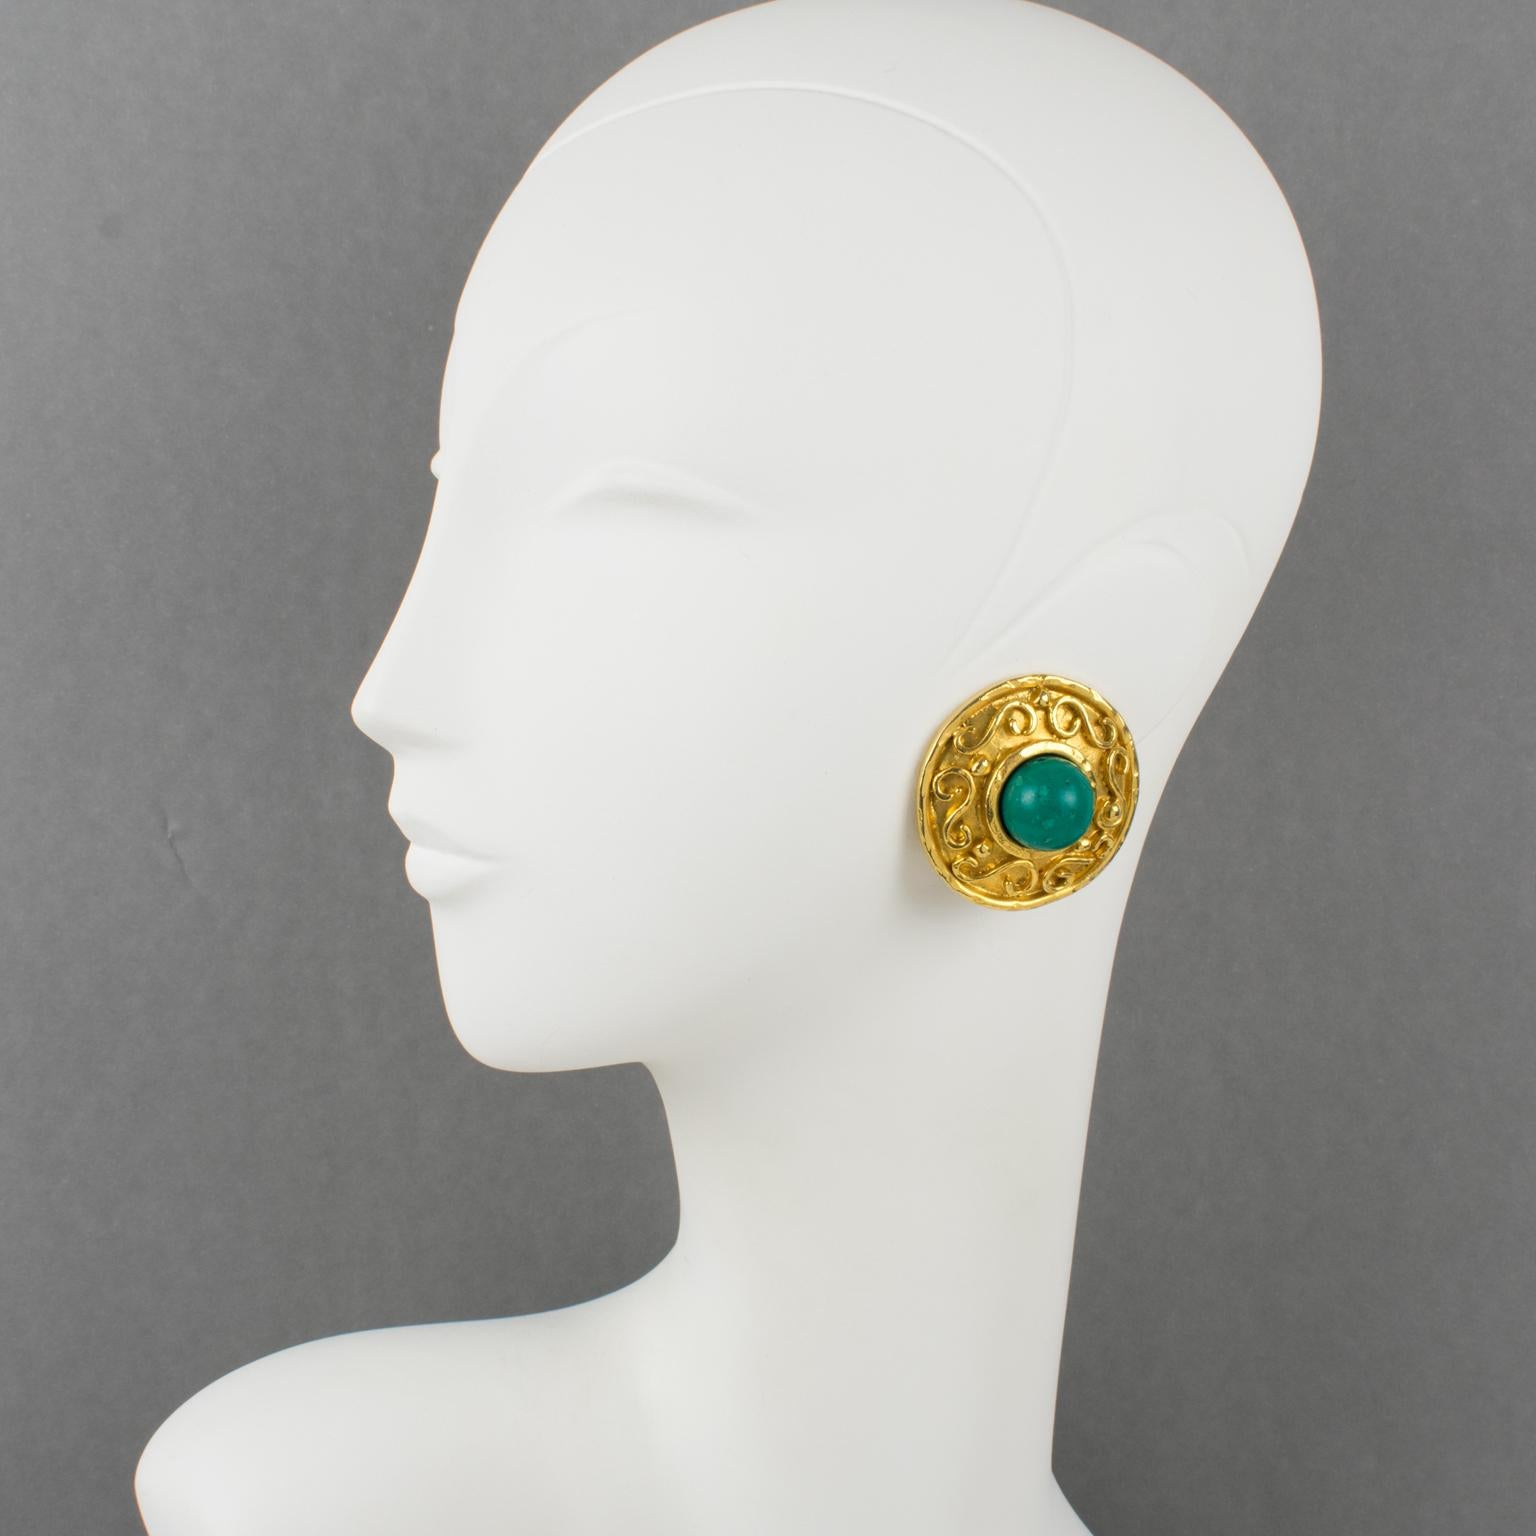 French designer Edouard Rambaud Paris designed those stunning Byzantine-inspired clip-on earrings. They feature a massive shiny, gilded metal rounded donut shape, all textured and ornate with turquoise-like resin bead cabochon. Each piece is signed